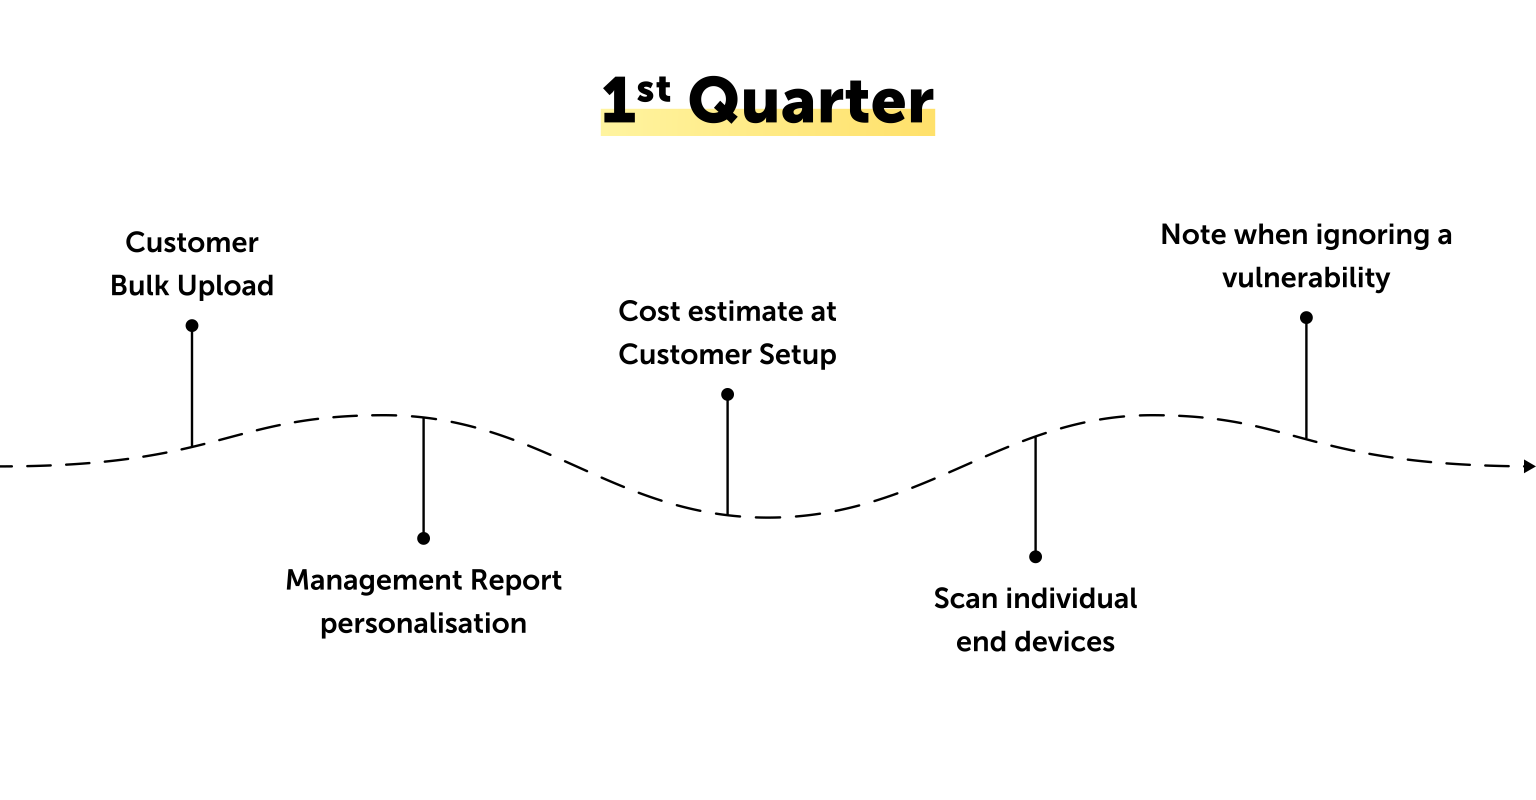 features of the 1st quarter